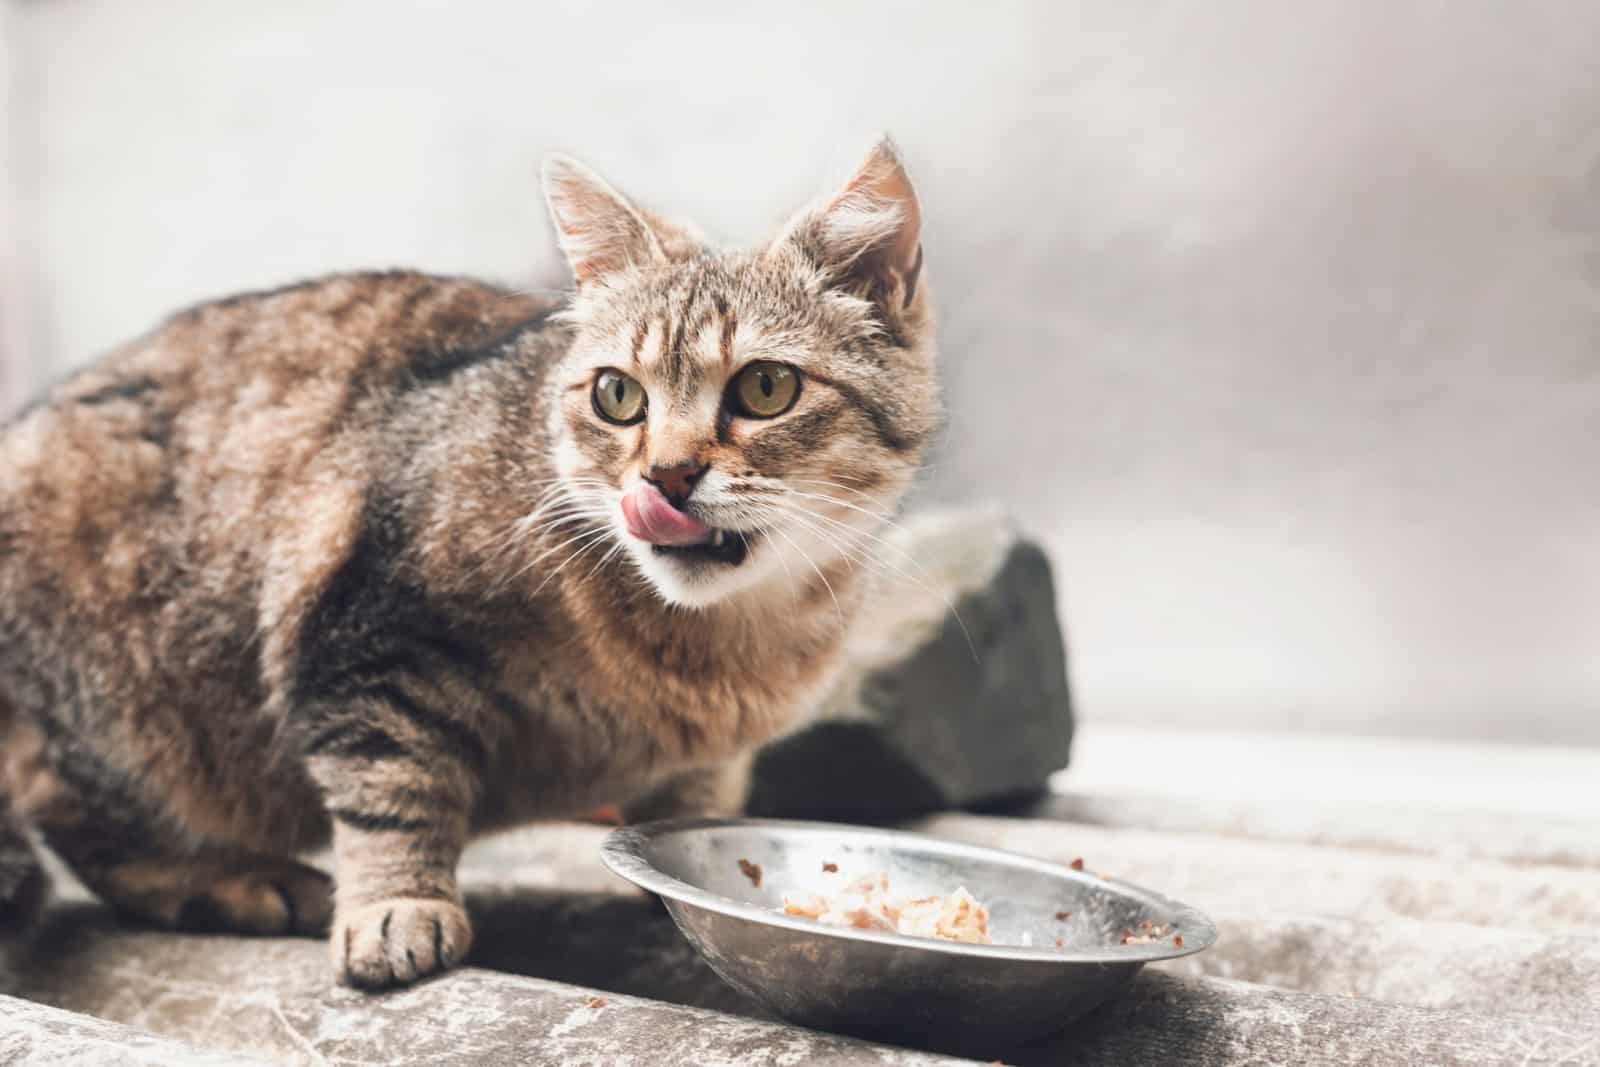 cat licks tongue after eating a meal